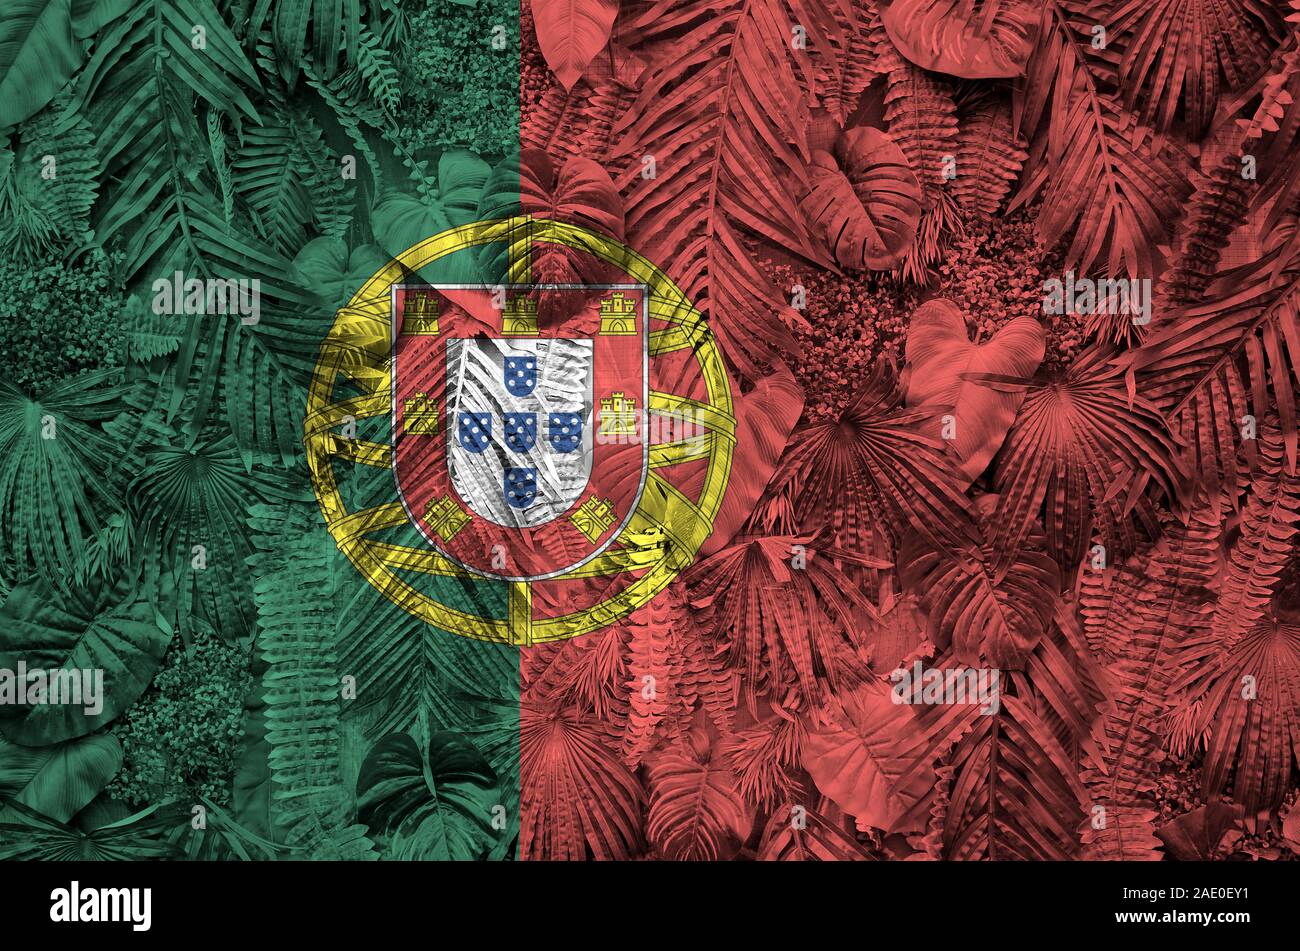 Portugal flag depicted on many leafs of monstera palm trees. Trendy fashionable background Stock Photo